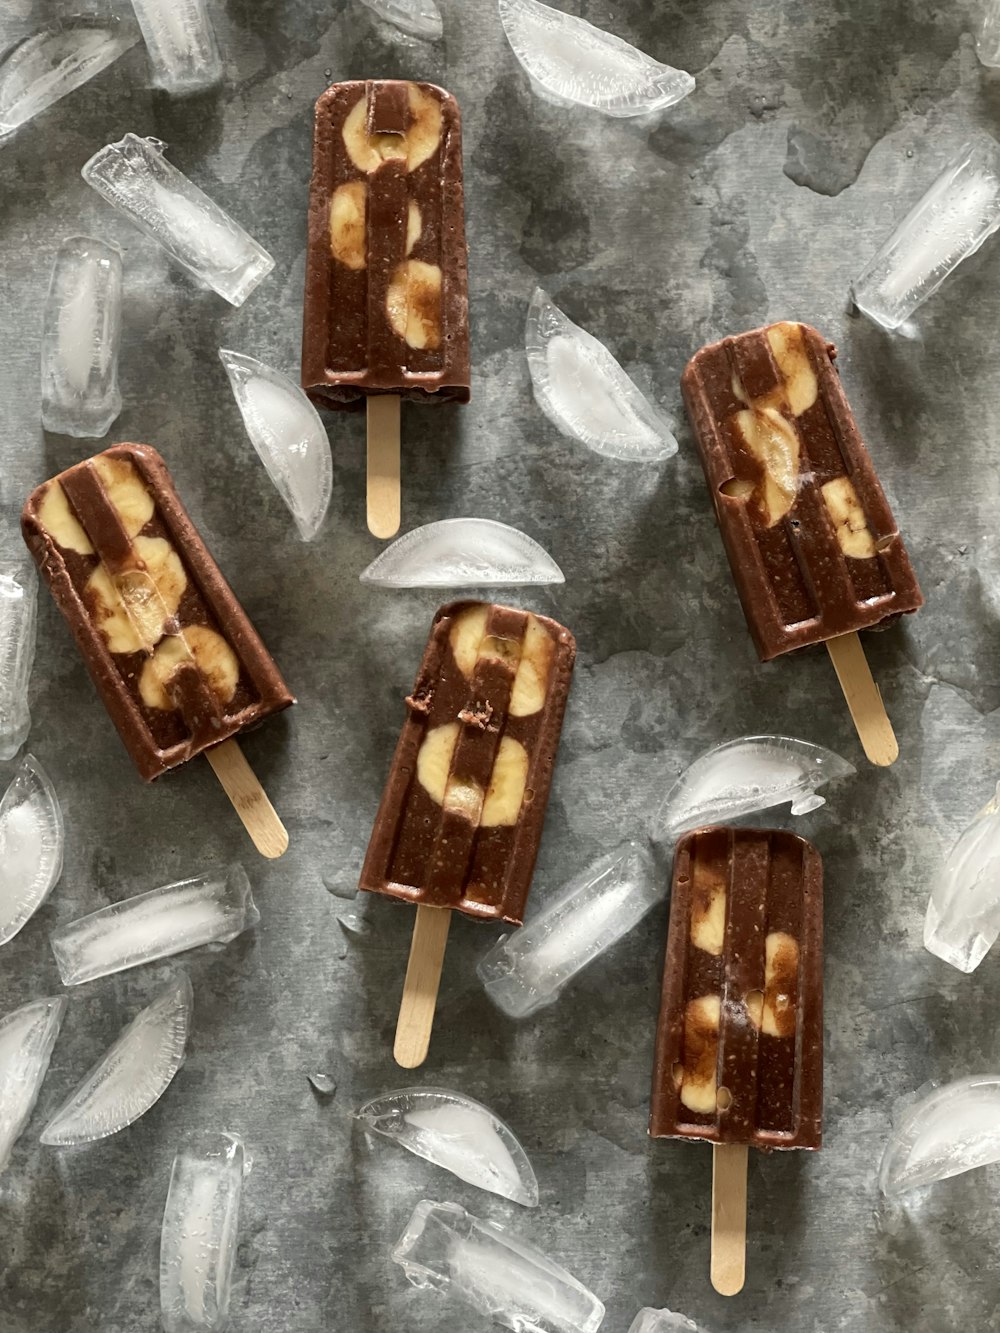 four pieces of chocolate and banana pops on ice